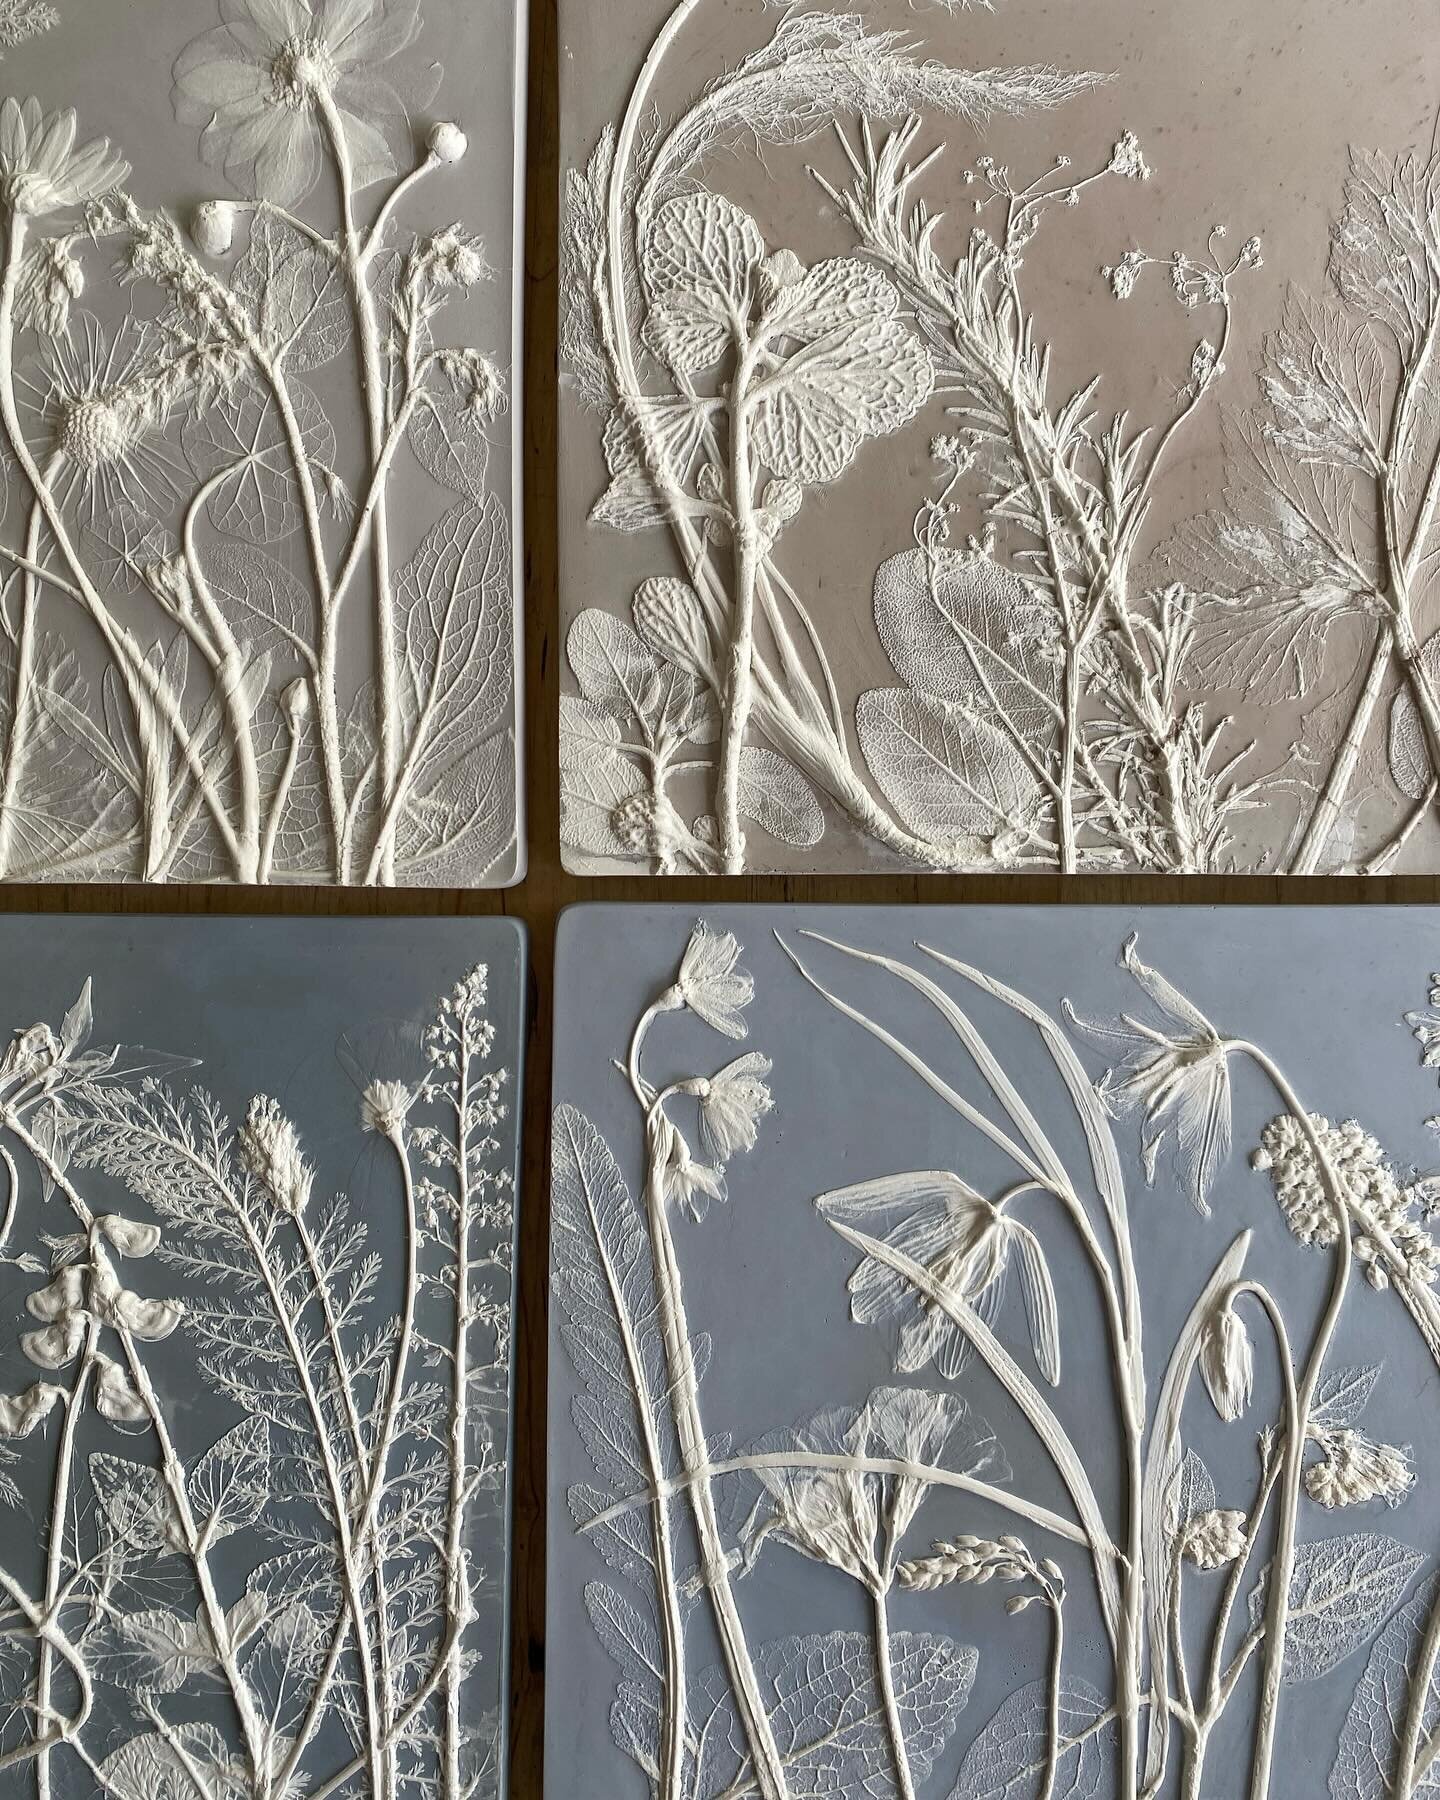 Impressions of Spring and Summer!
#botanicalbasrelief